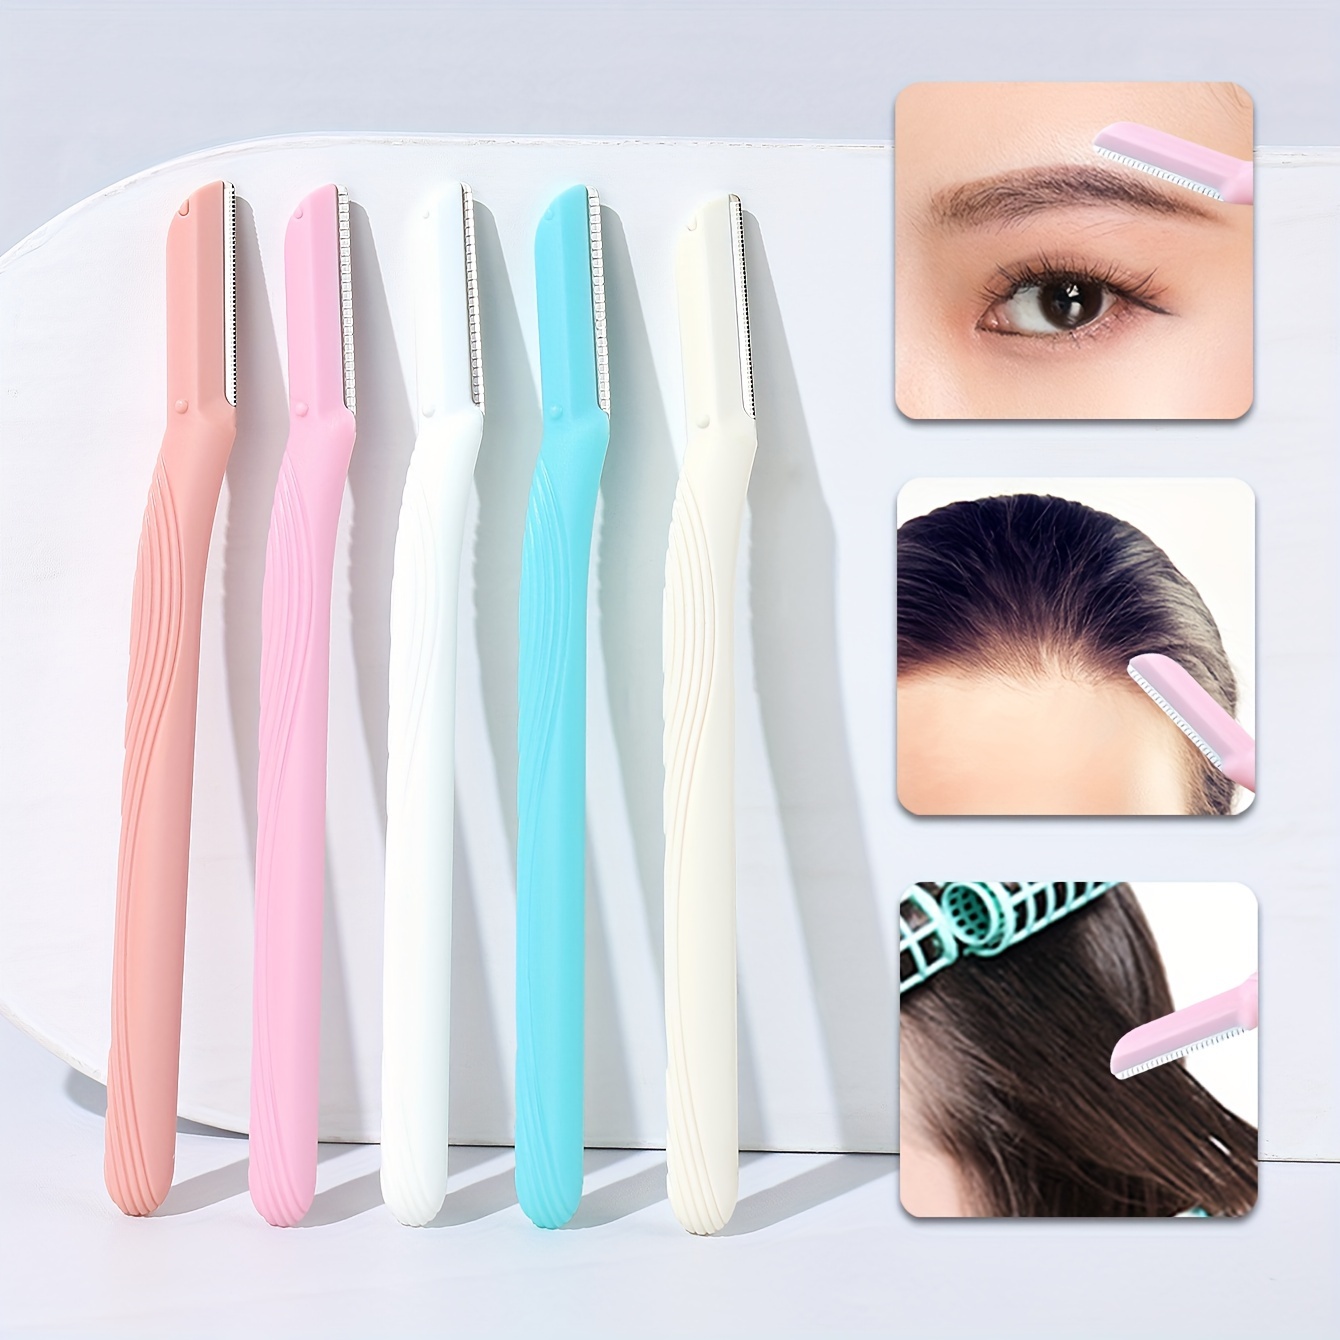 3pack Eyebrow Trimmer Safe And Portable Great For Eyebrows Peach